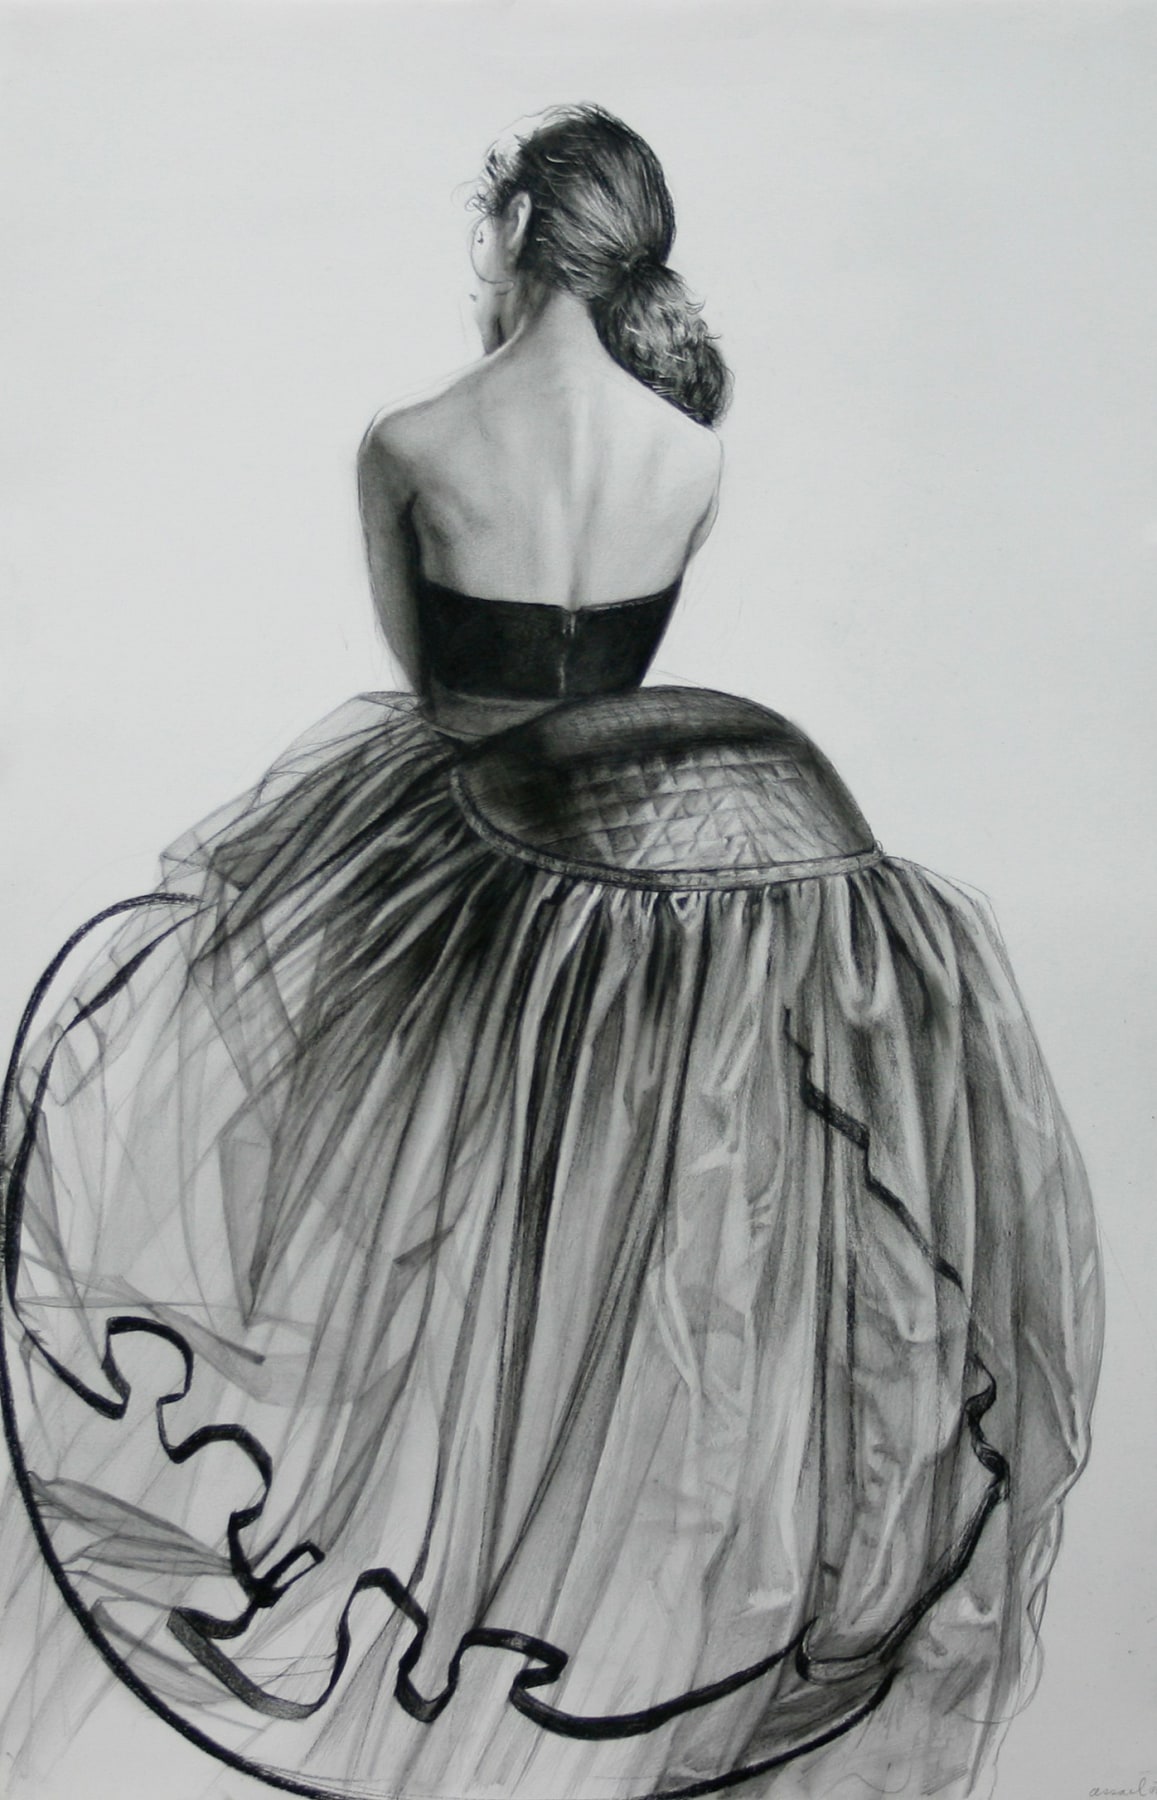 Steven Assael, Big Dress (SOLD), 2008, crayon and graphite on paper, 19 3/4 x 12 7/8 inches